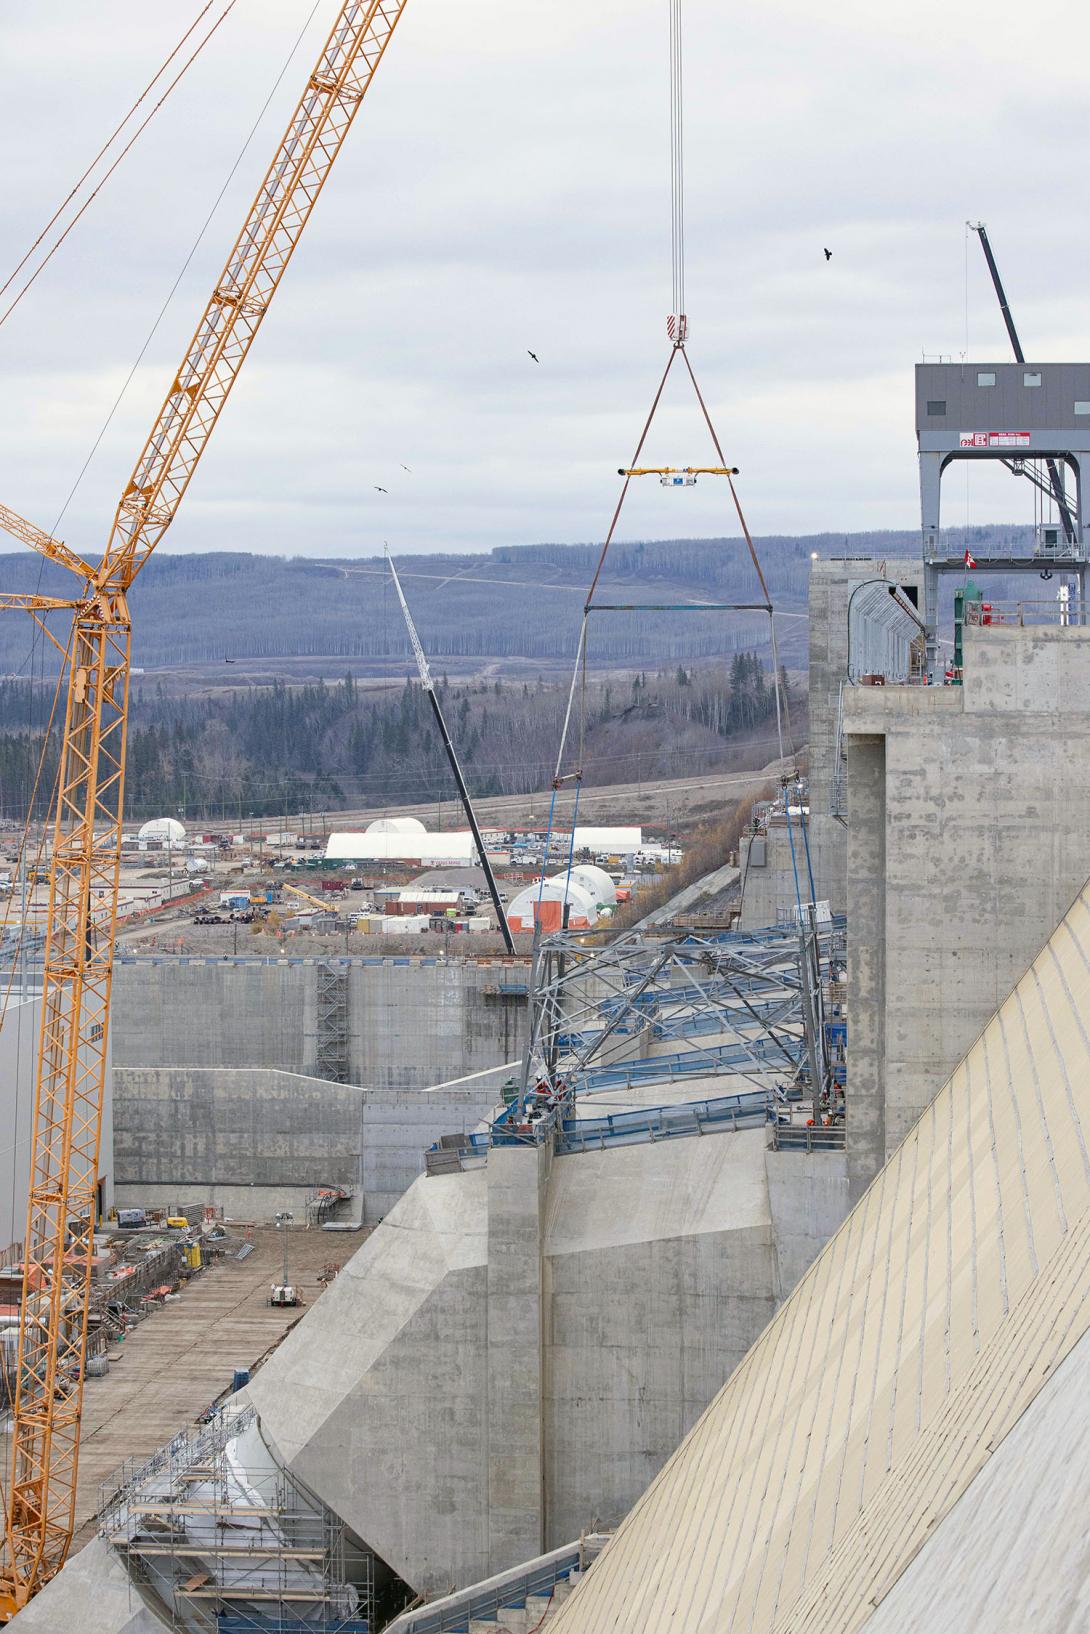 The base for the first transmission tower is positioned on penstock unit 1.